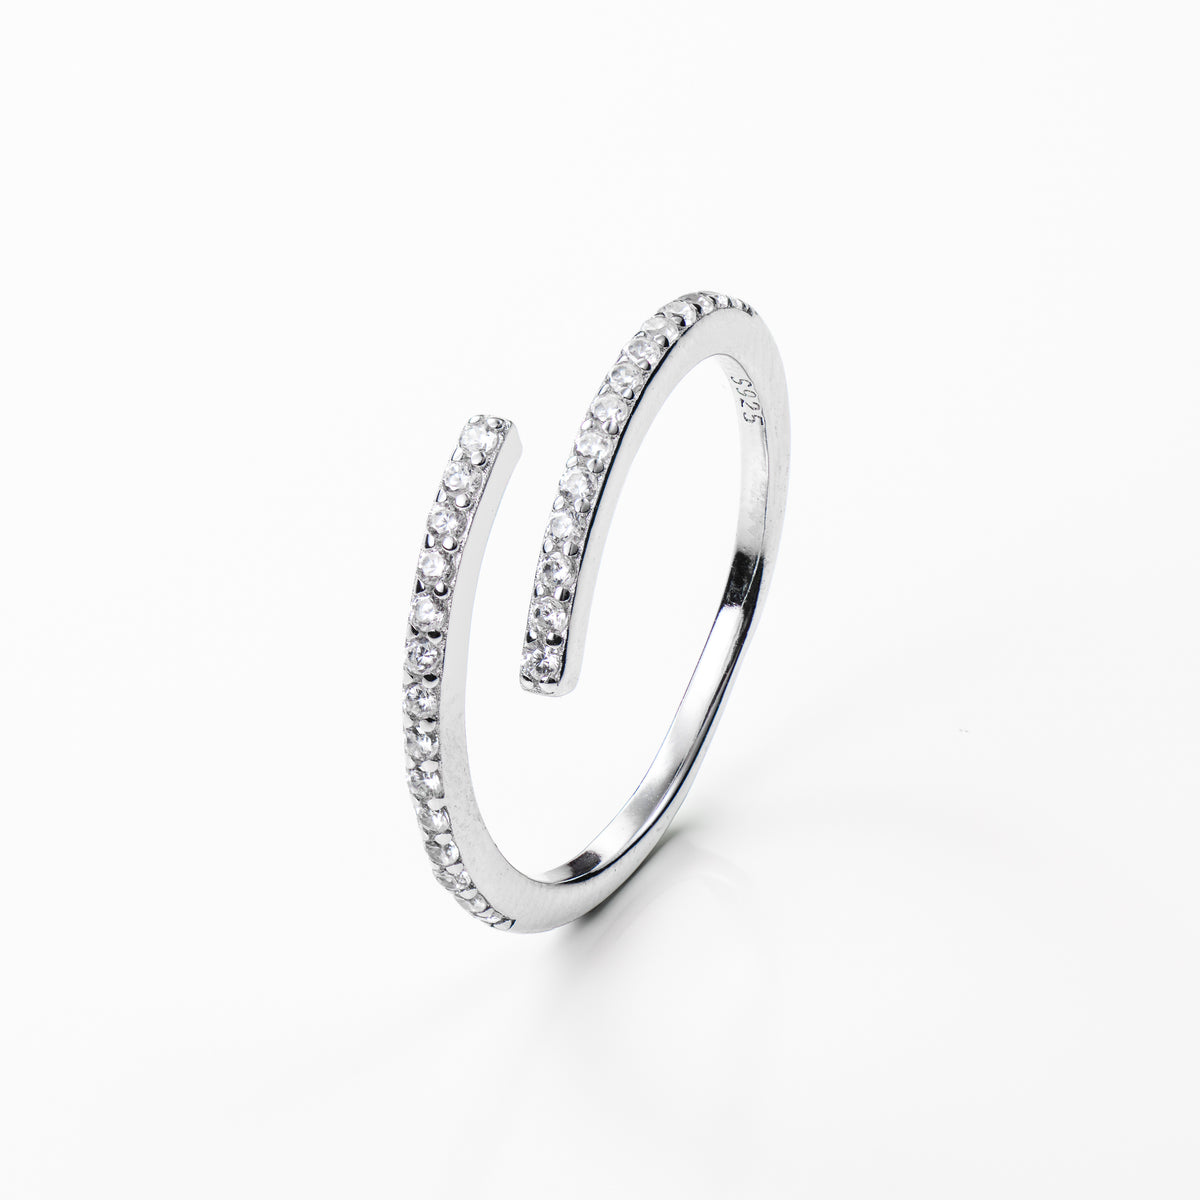 Delicate silver RING, Maison Stephanie